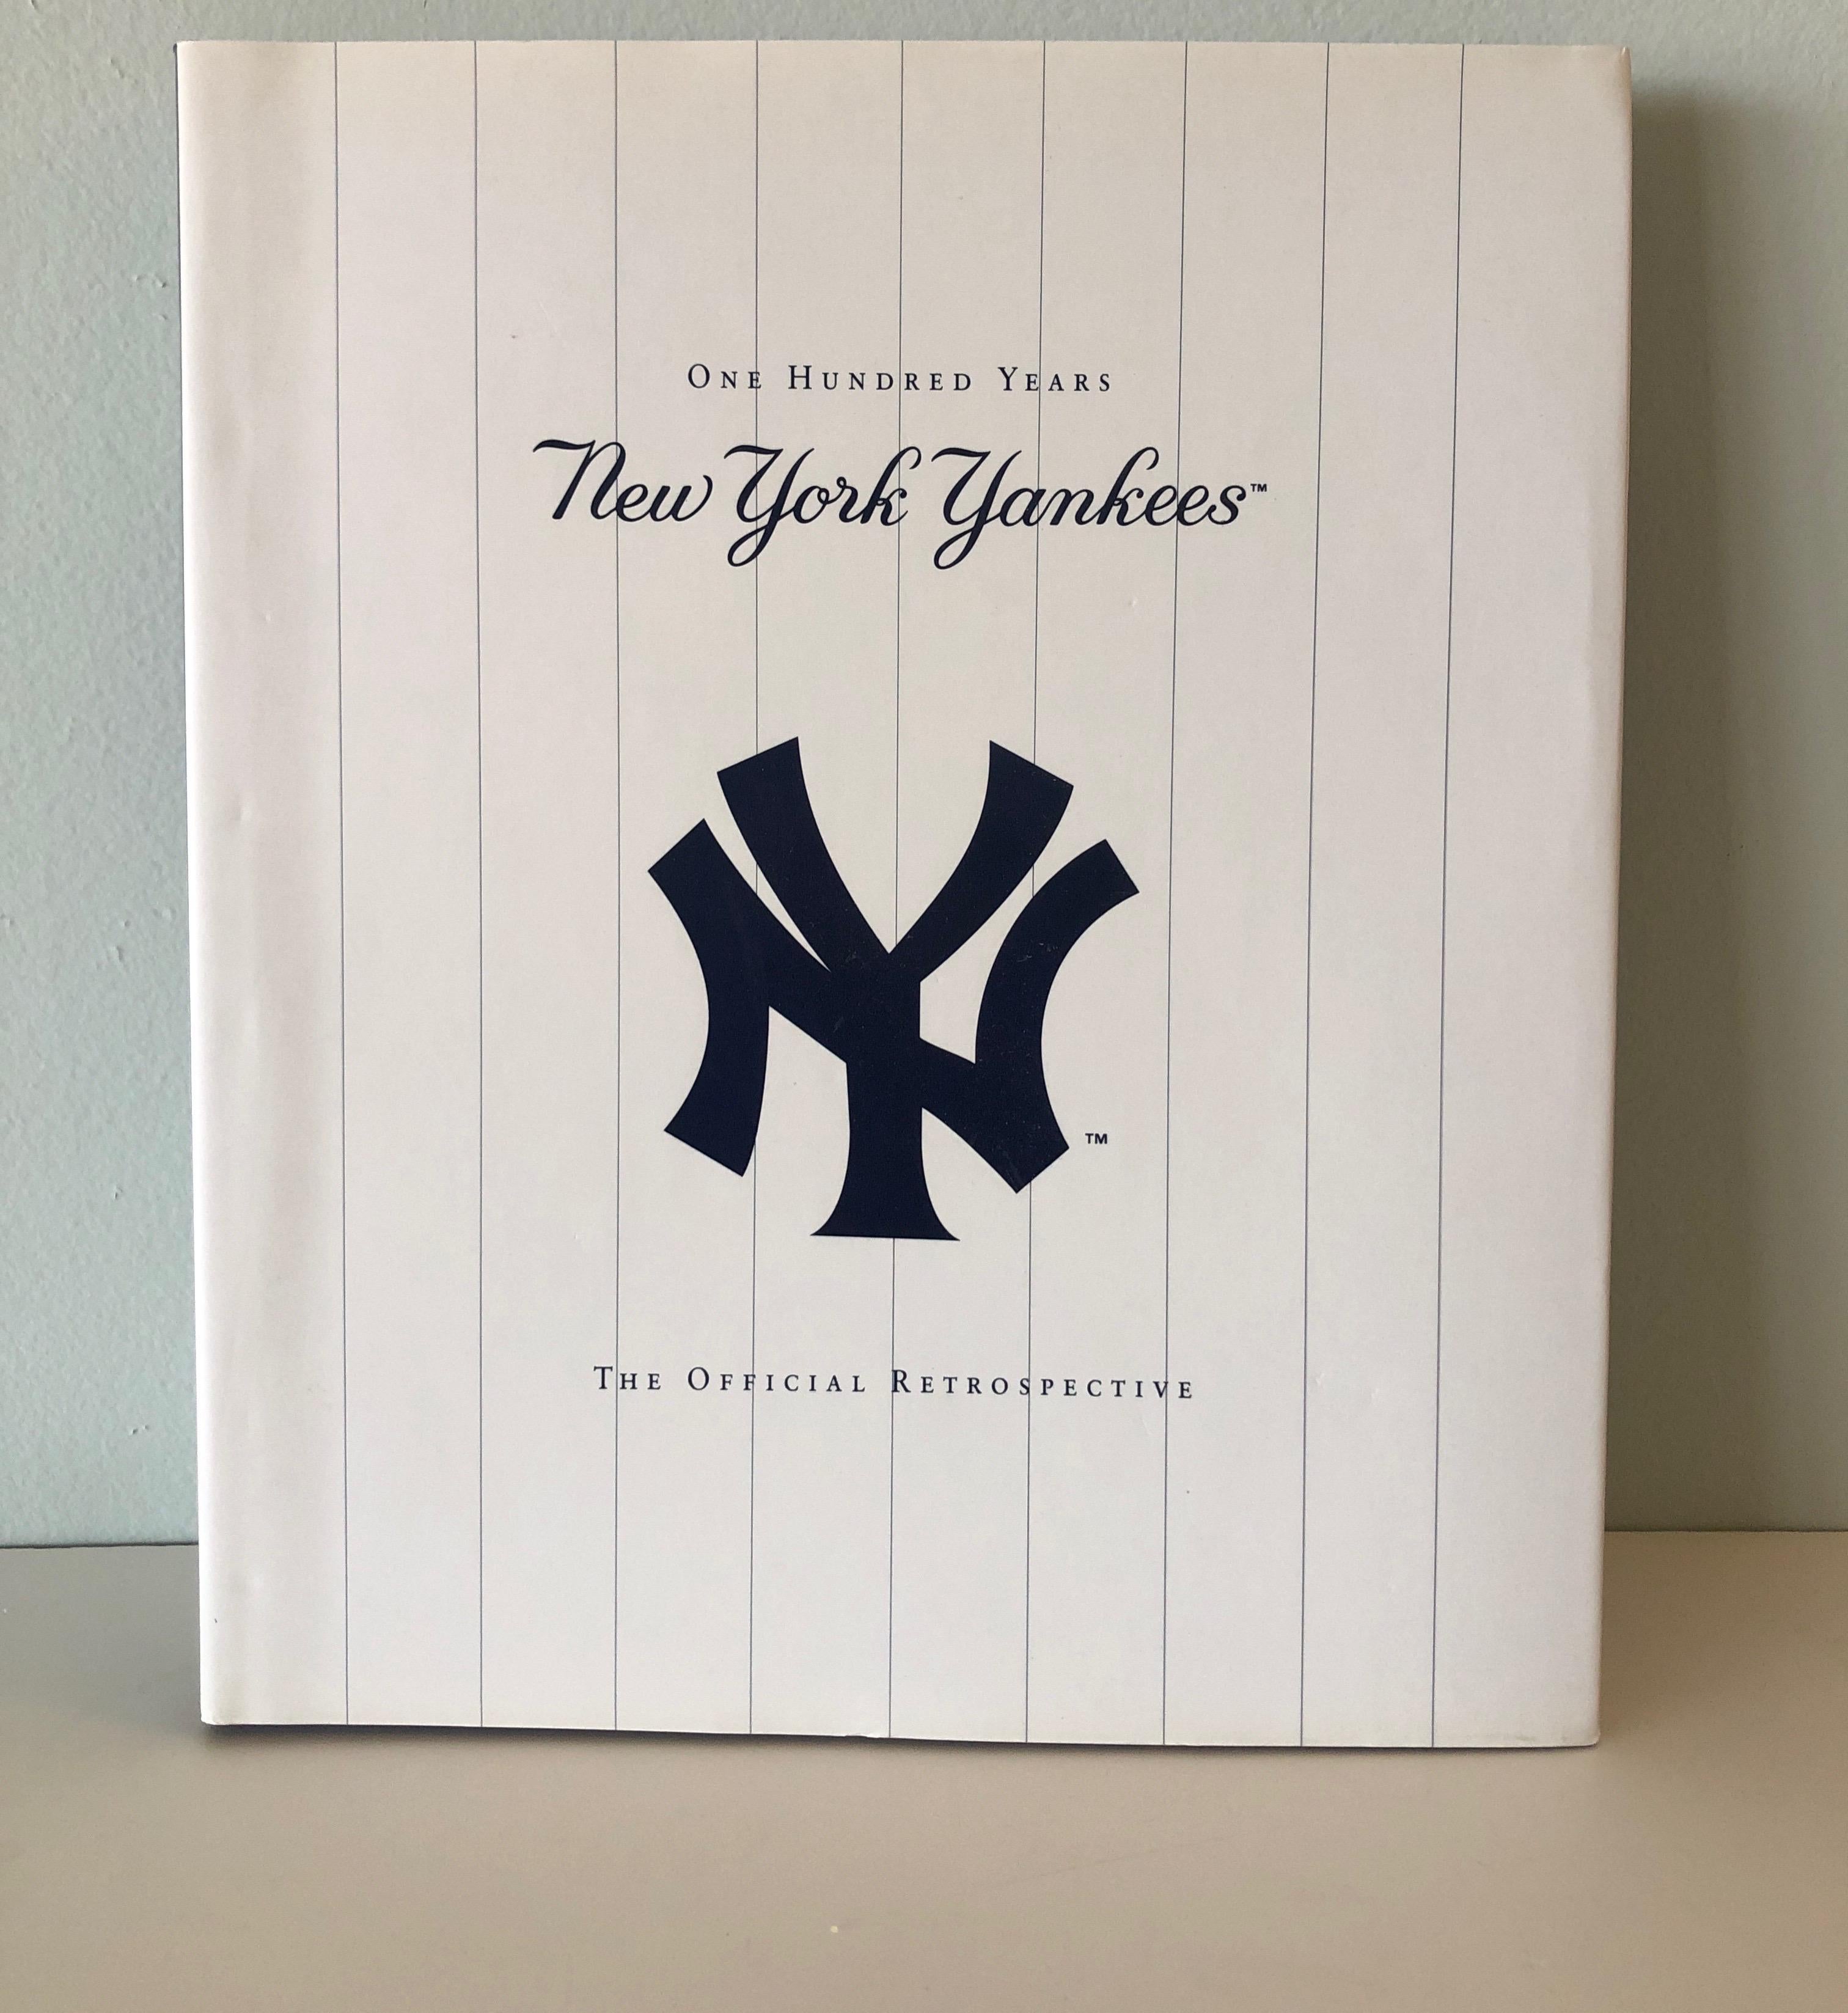 New York Yankees One Hundred Years The Official Retrospective
The New York Yankees. One hundred seasons of baseball. One hundred years of tradition. This official book celebrates the most successful team in sports history. Lavishly illustrated and